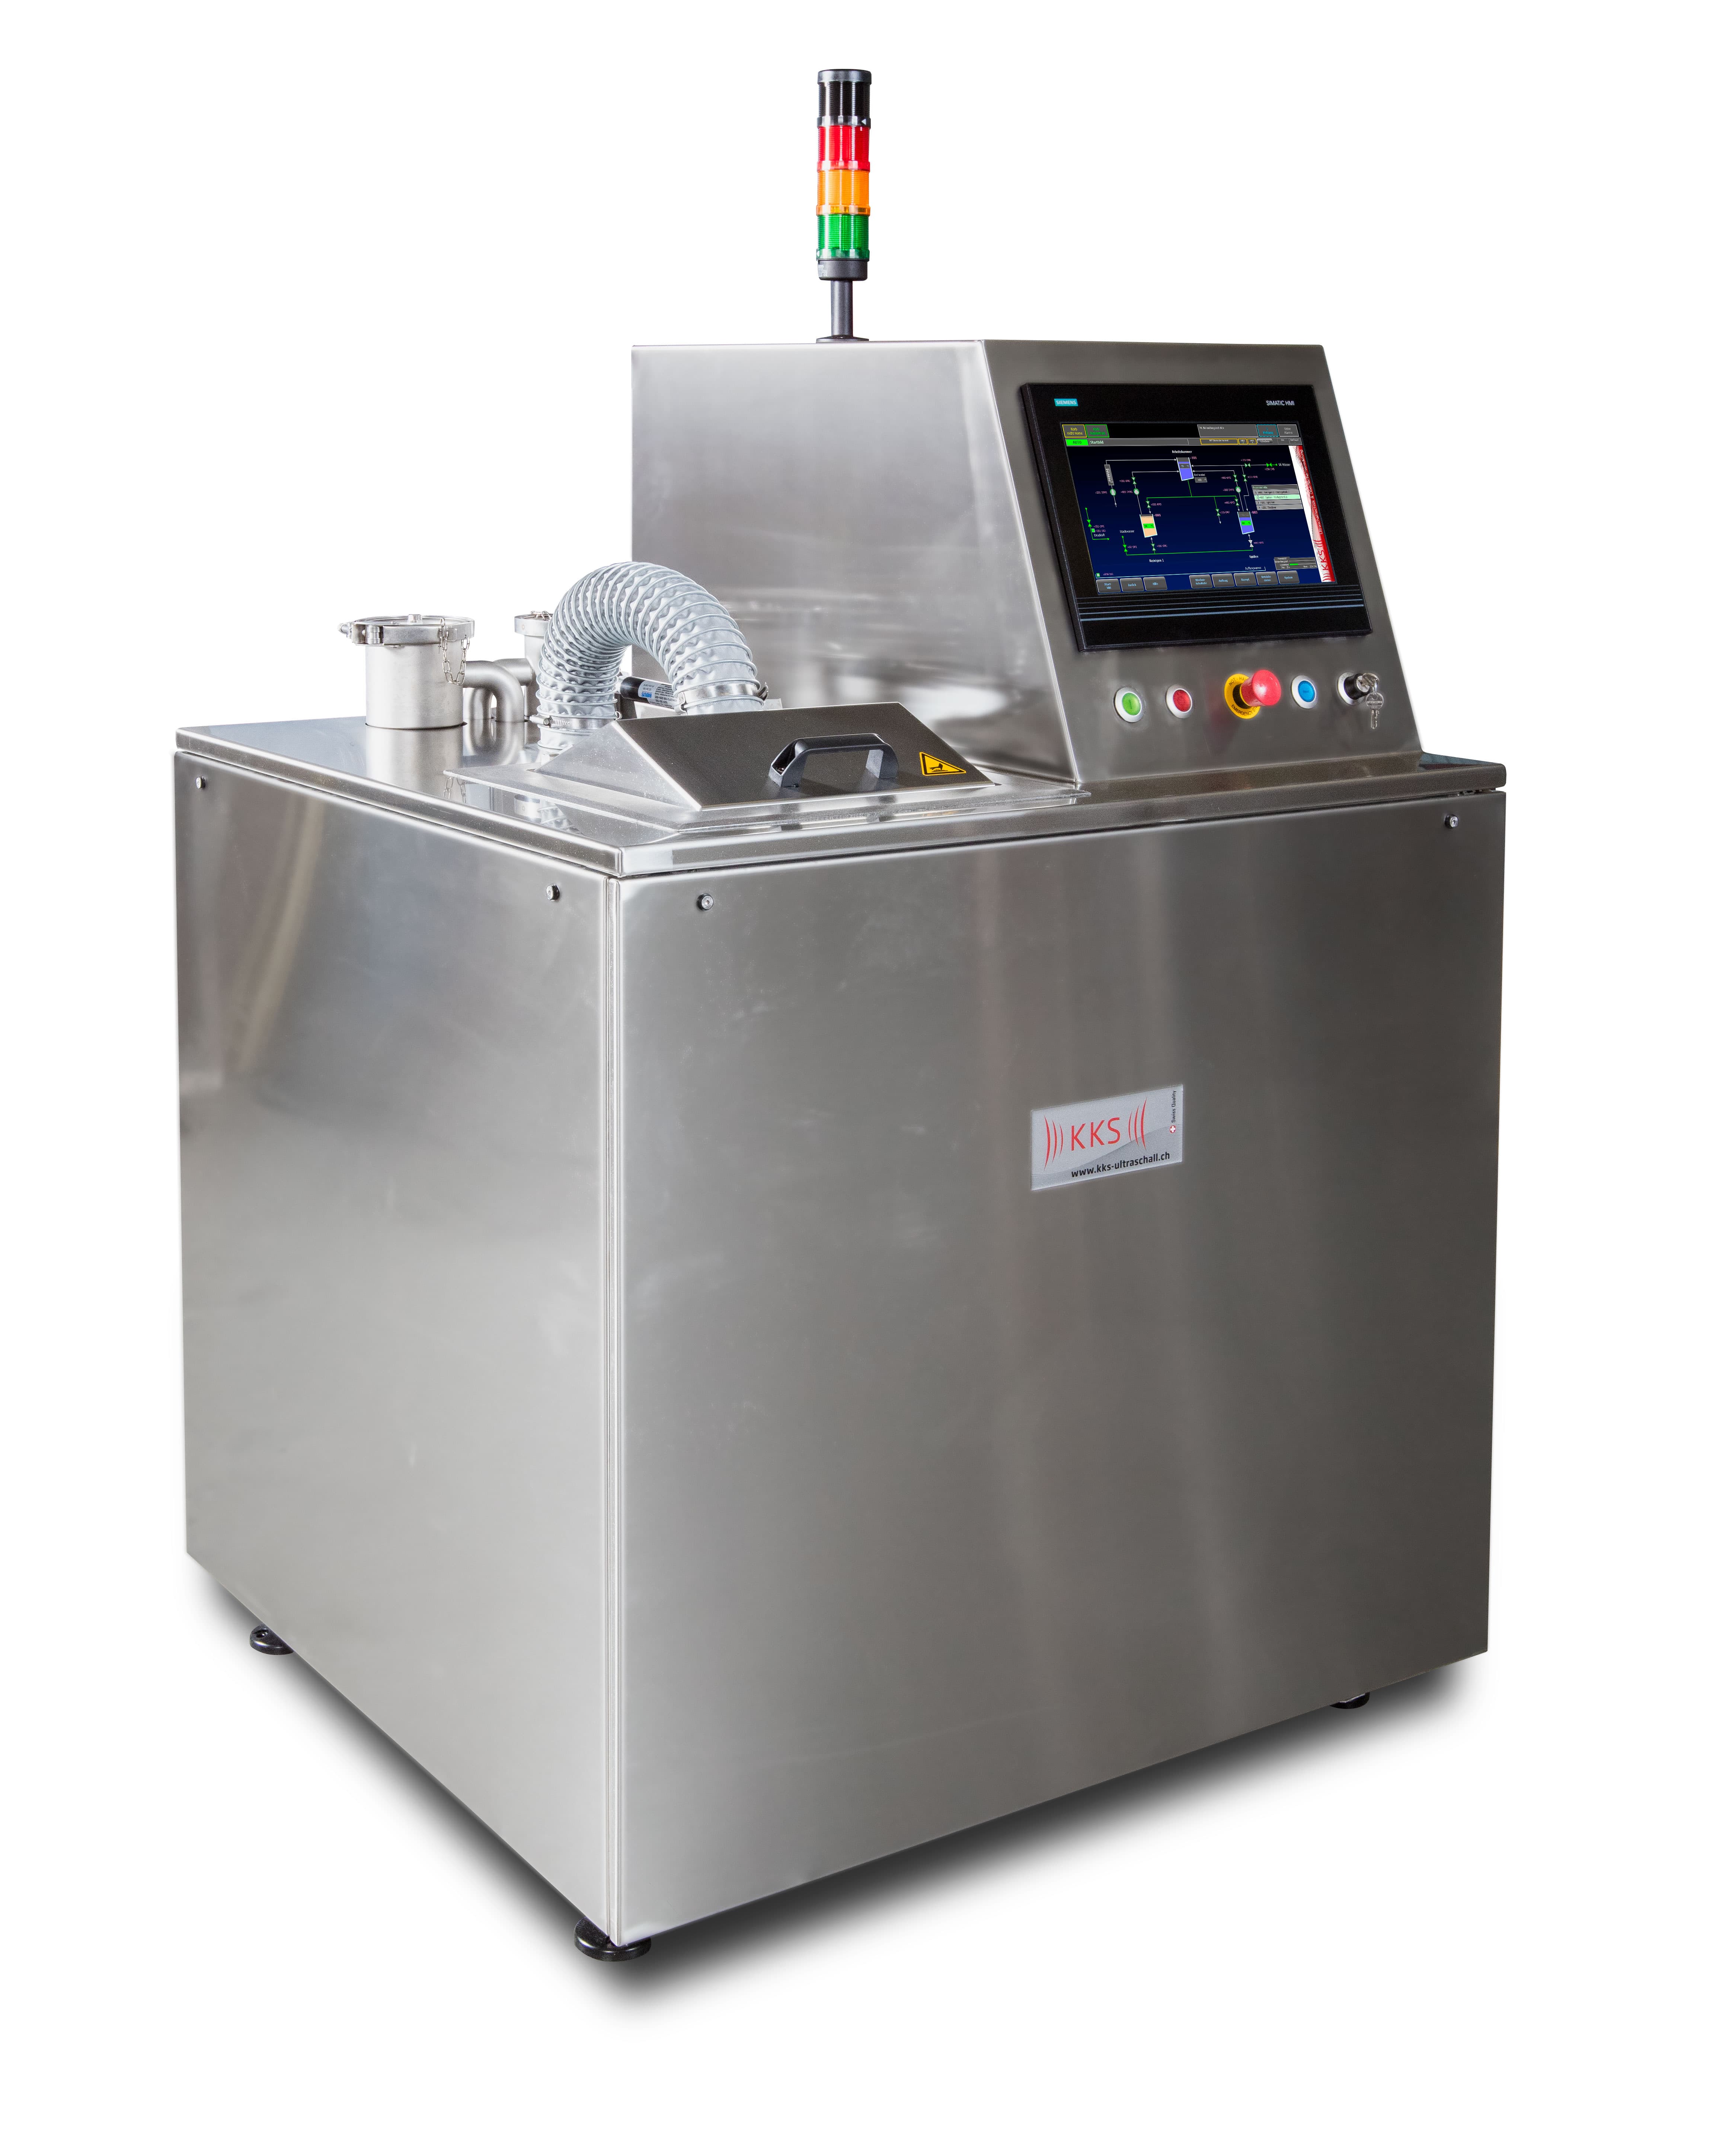 Automatic single chamber cleaning systems type KTR/KTRO - 2 tank version